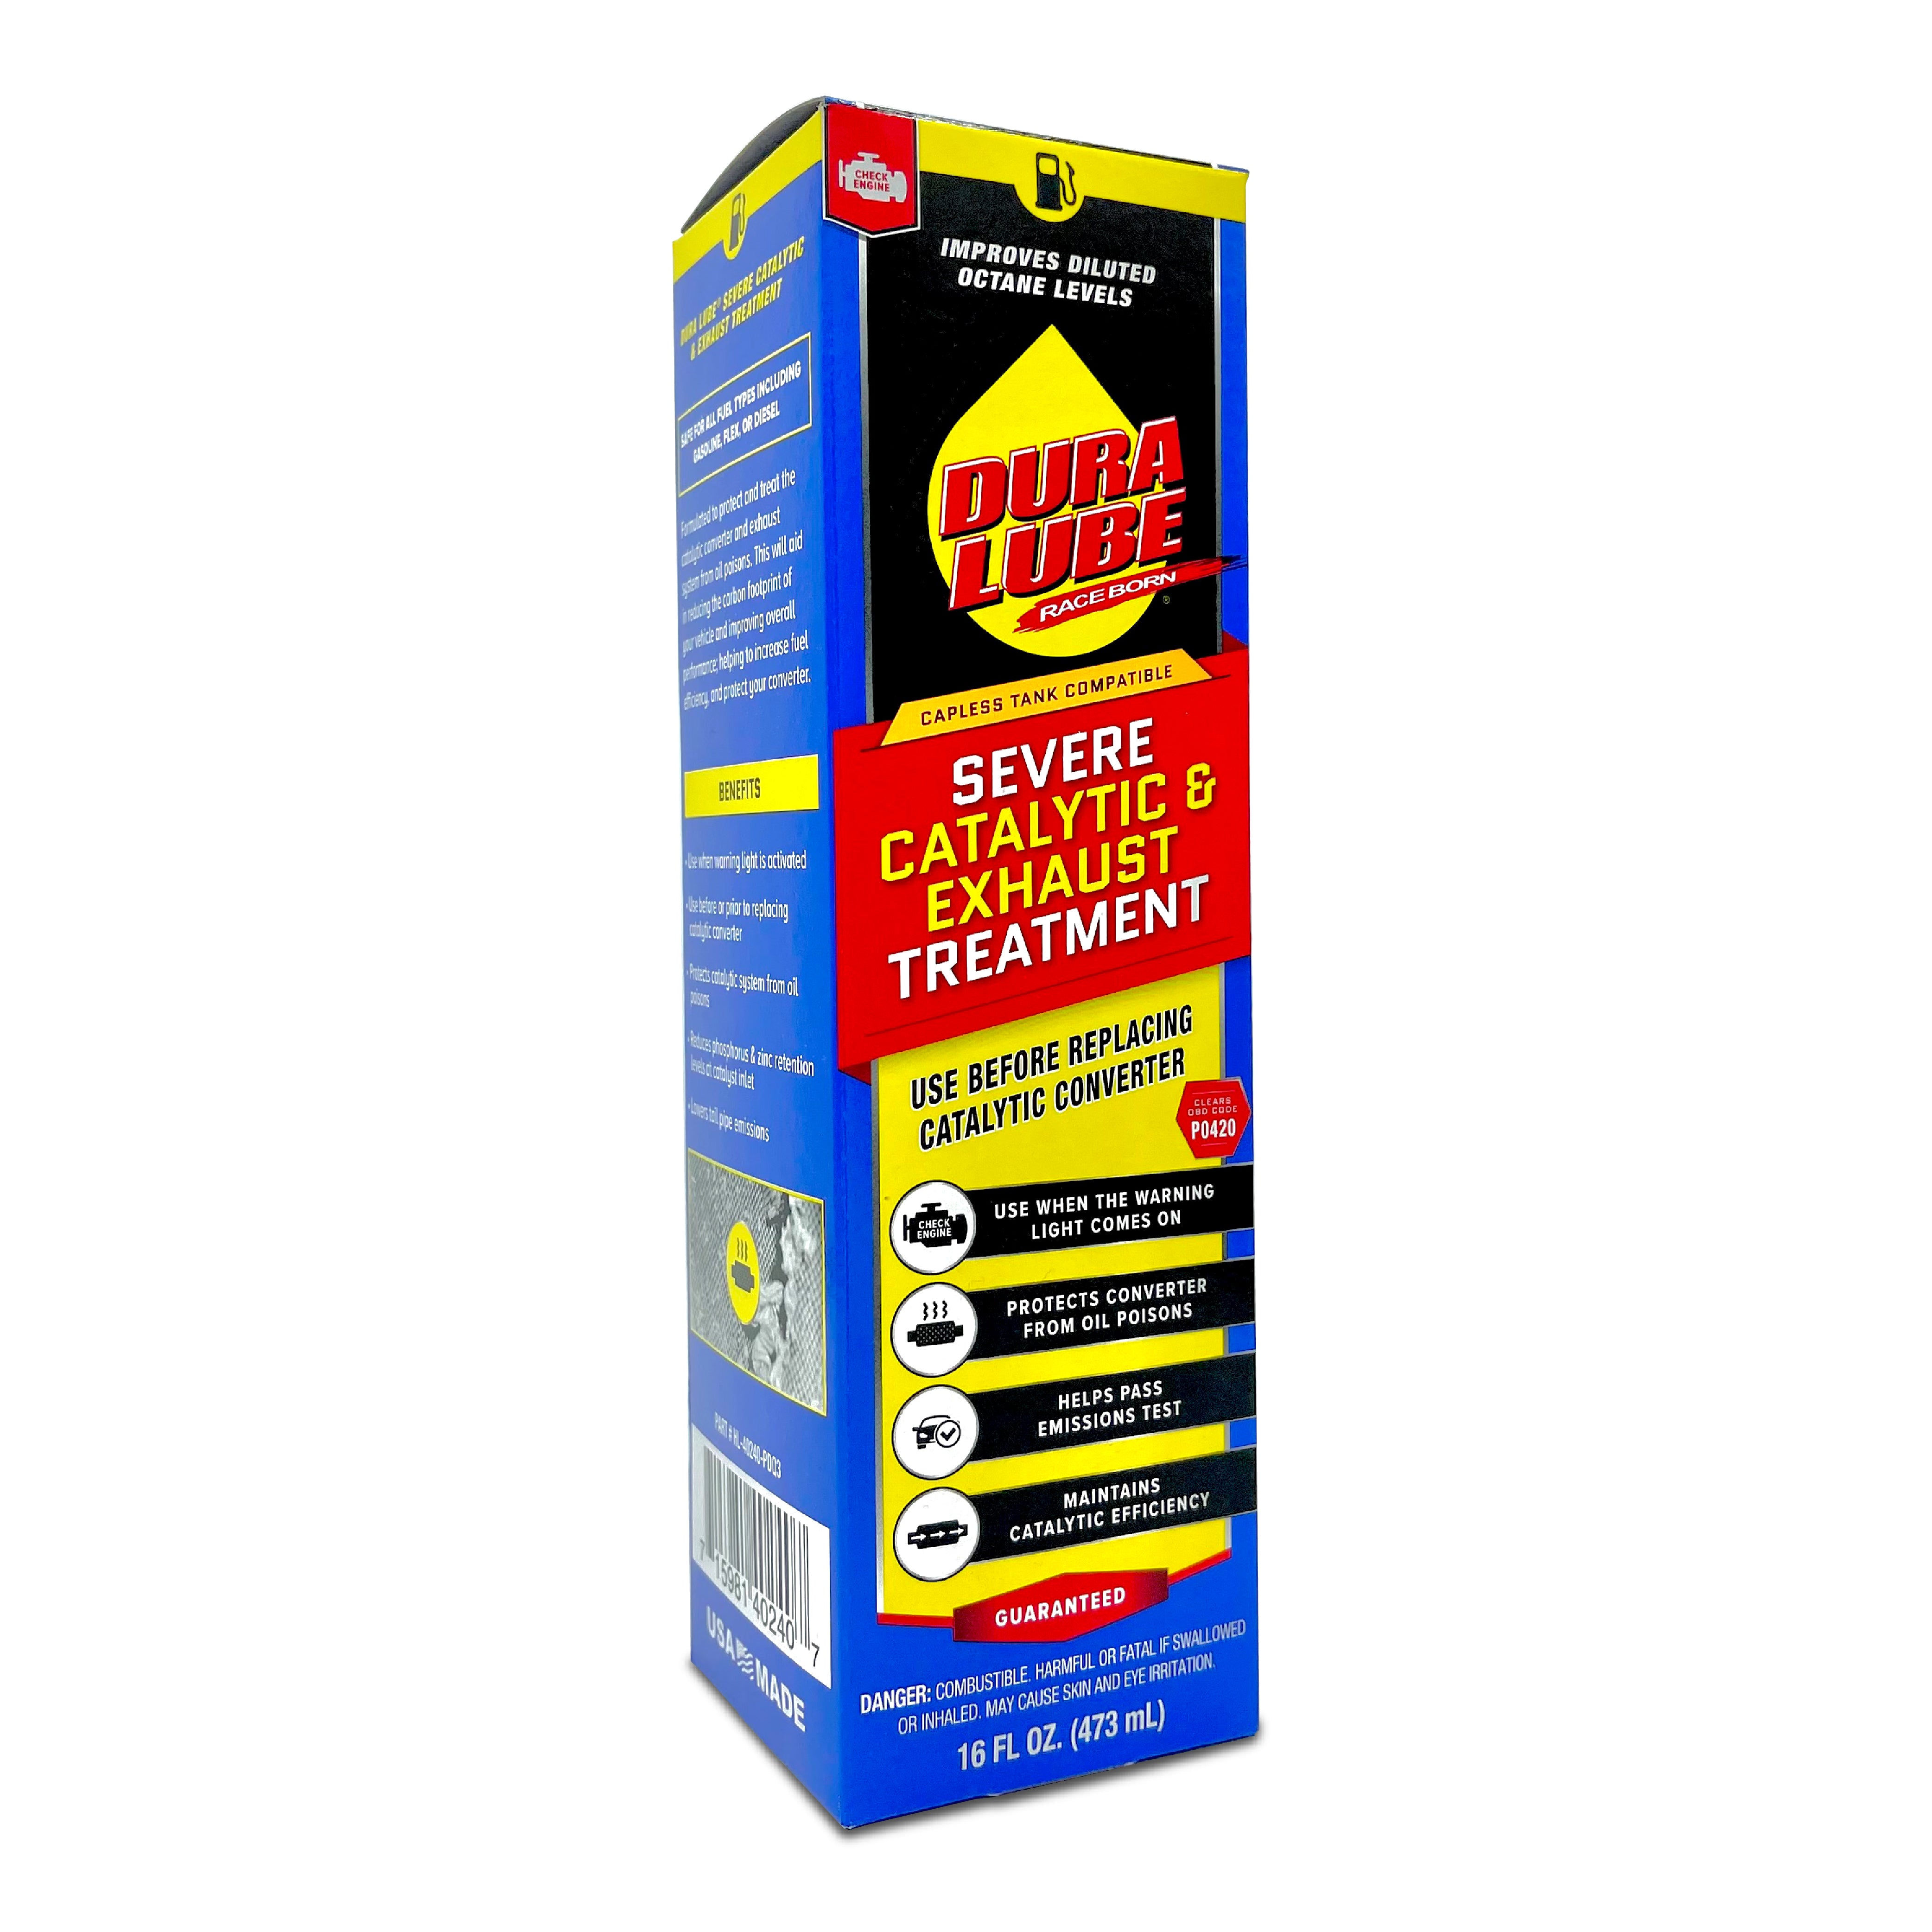 Cataclean Fuel And Exhaust System Cleaner for Sale in Los